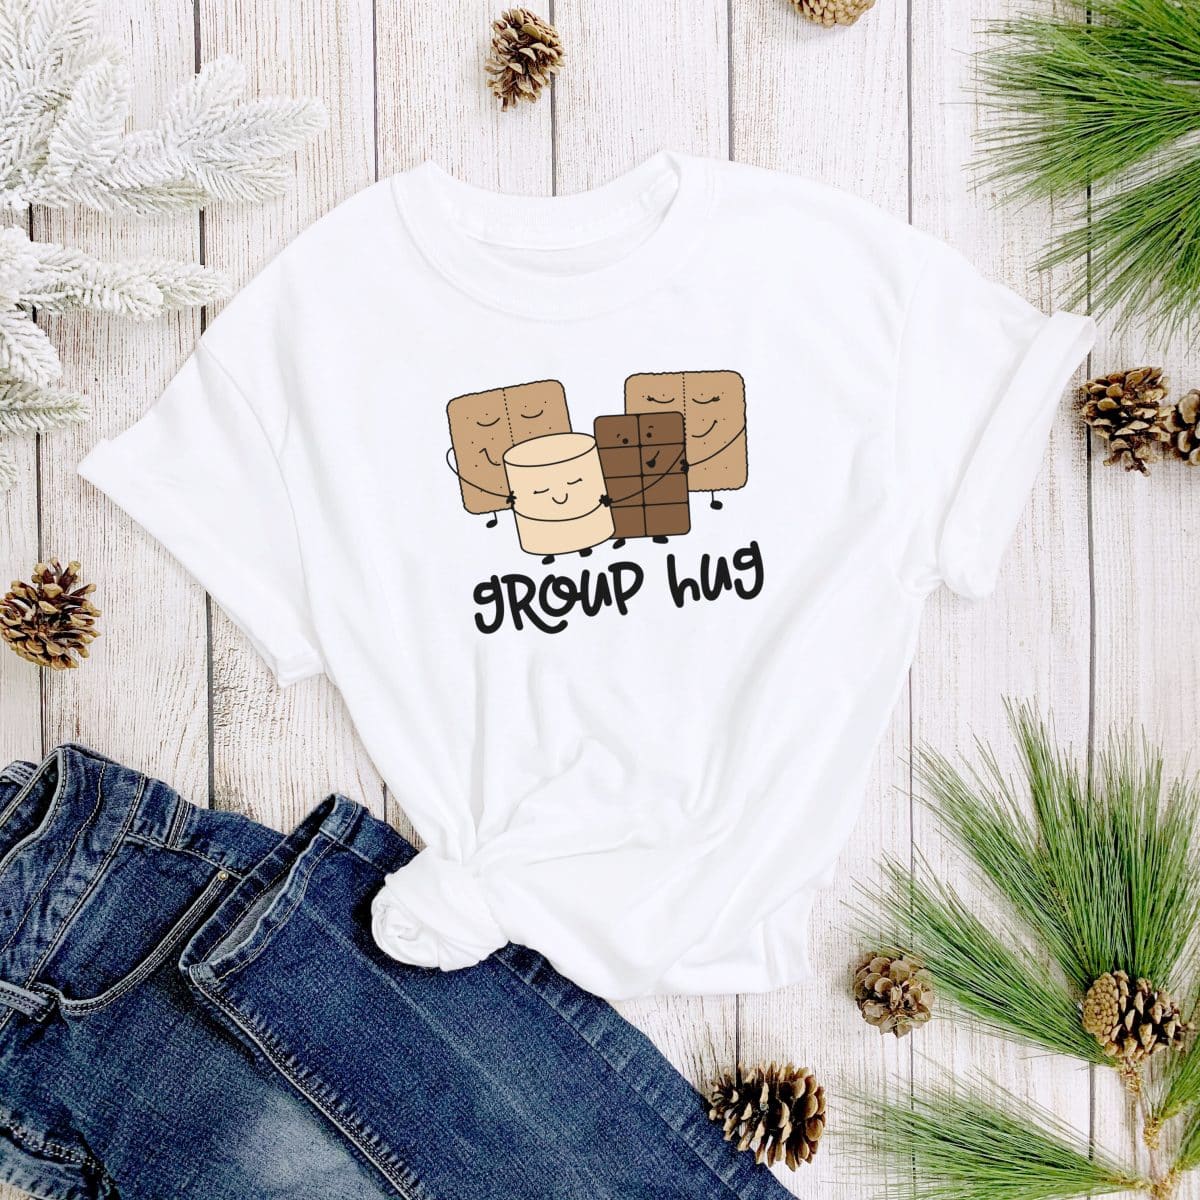 Group Hug Shirt by Mad in Crafts